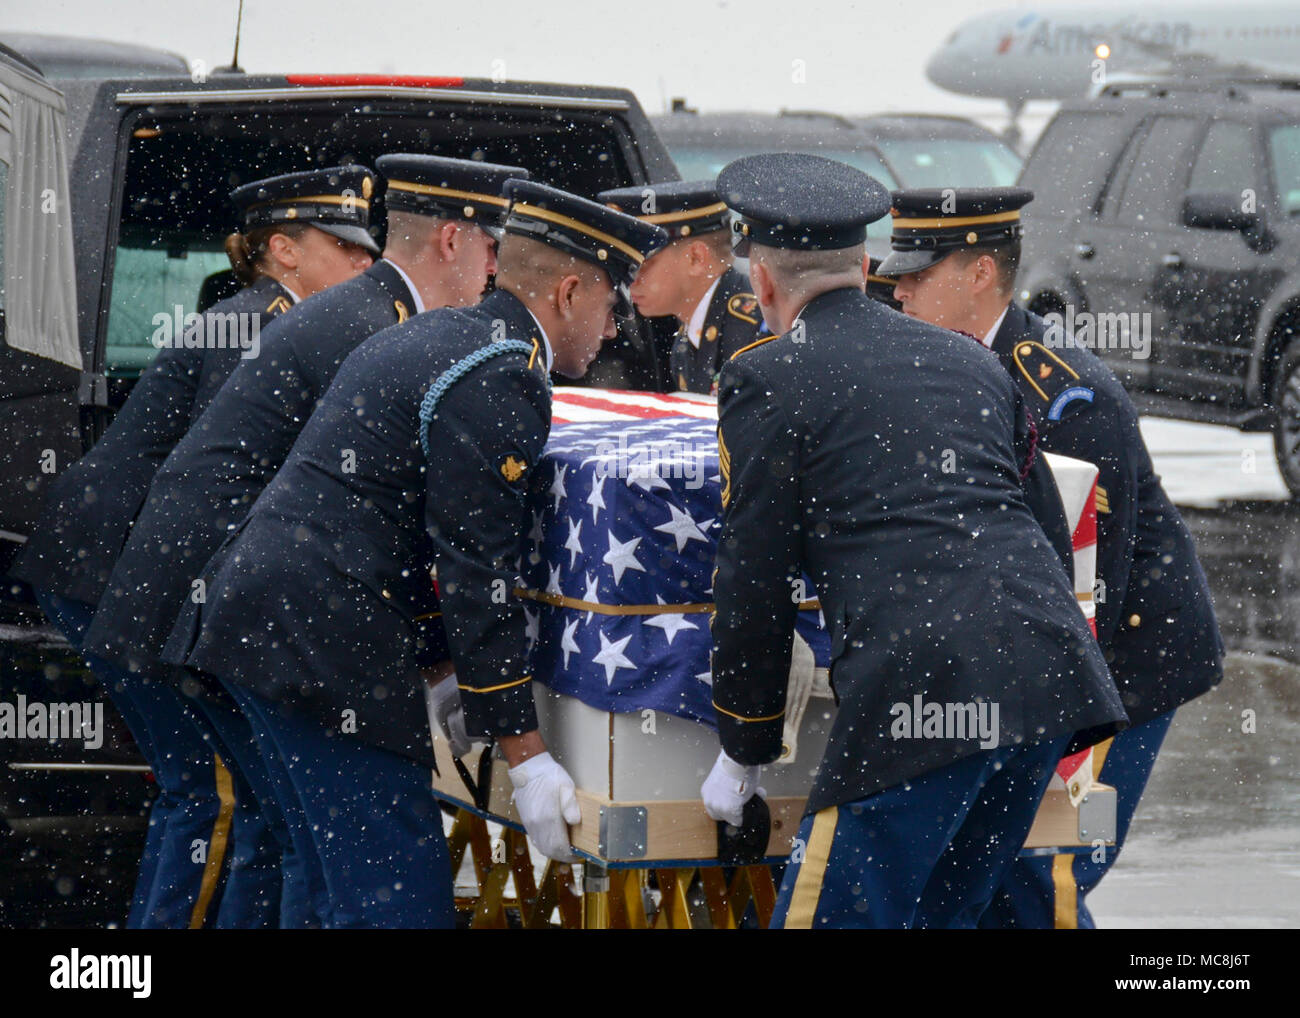 BOSTON (Apr. 2, 2018) The Military Funeral Honors Team of the Massachusetts Army National Guard carries the casket of Medal of Honor Recipient Capt. Thomas J. Hudner, Jr., USN, to a plane for transport to Arlington National Cemetery for his final internment. Capt. Hudner, a naval aviator, received the Medal of Honor for his actions during the Battle of the Chosin Reservoir during the Korean War. Stock Photo